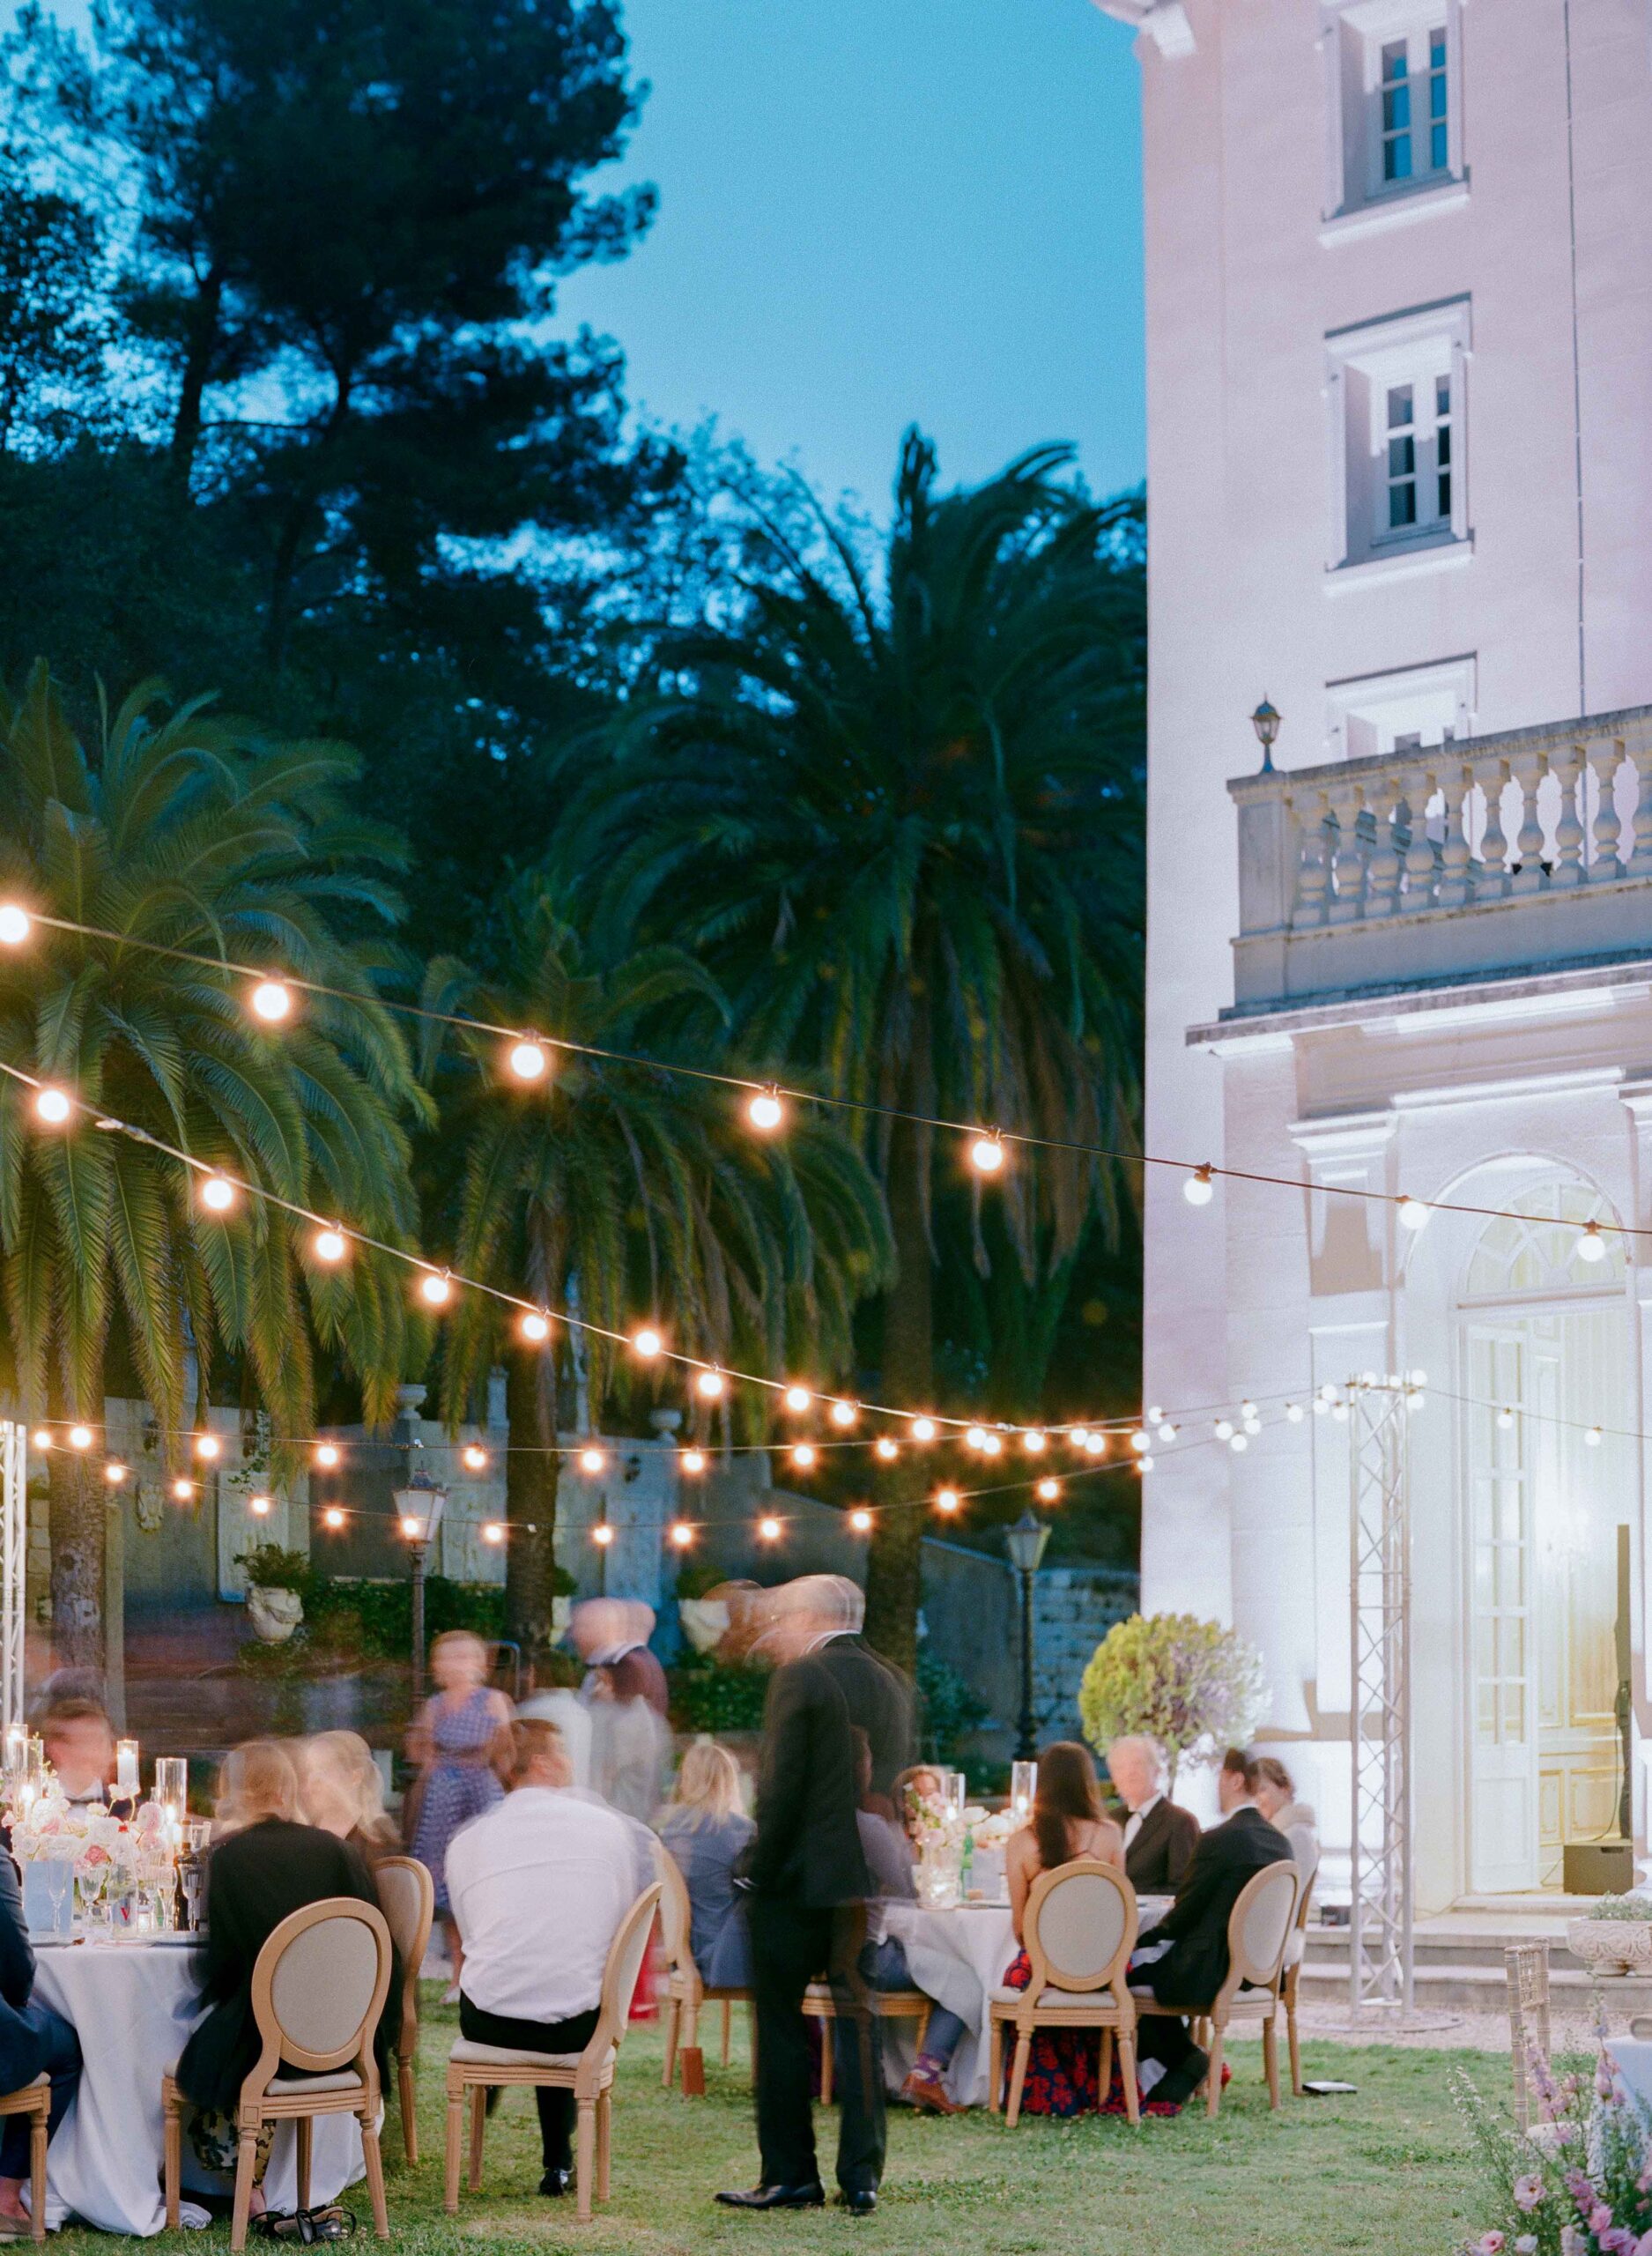 Chateau Saint Georges Wedding Photographer | Grasse | French Riviera | Molly Carr Photography